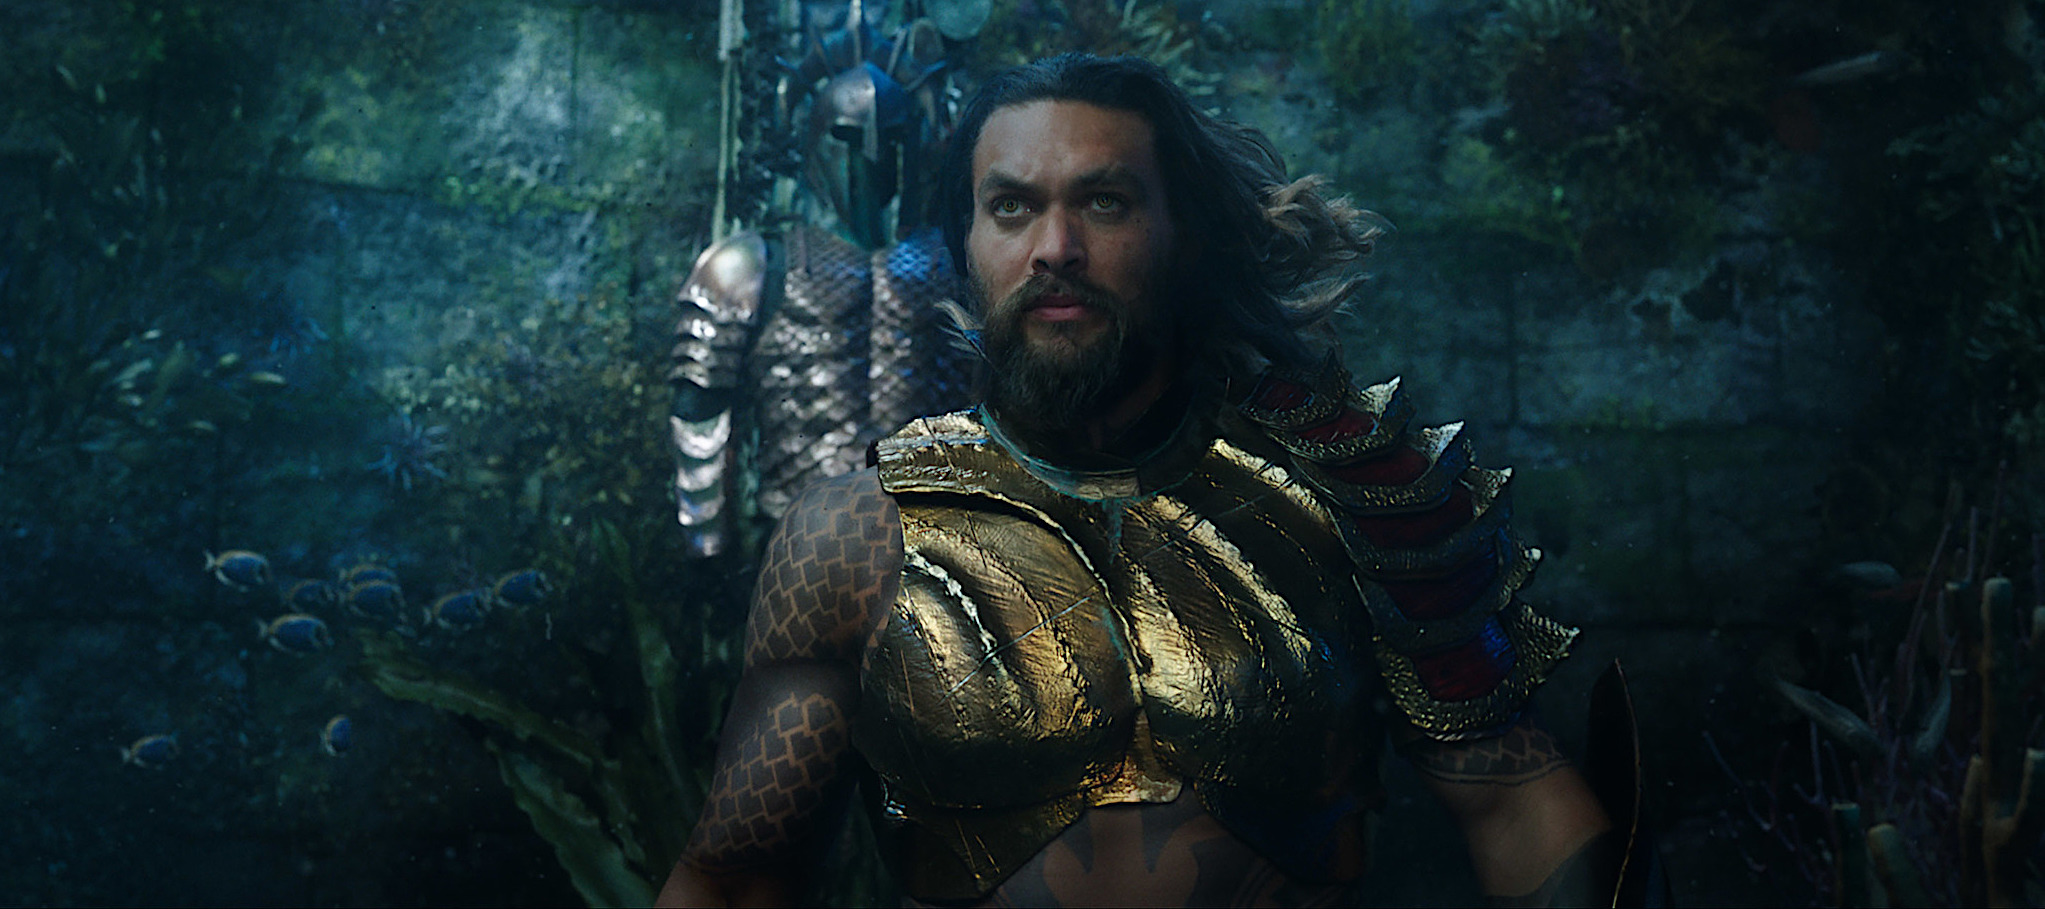 Jason Momoa in the live-action Aquaman, underwater and in armor